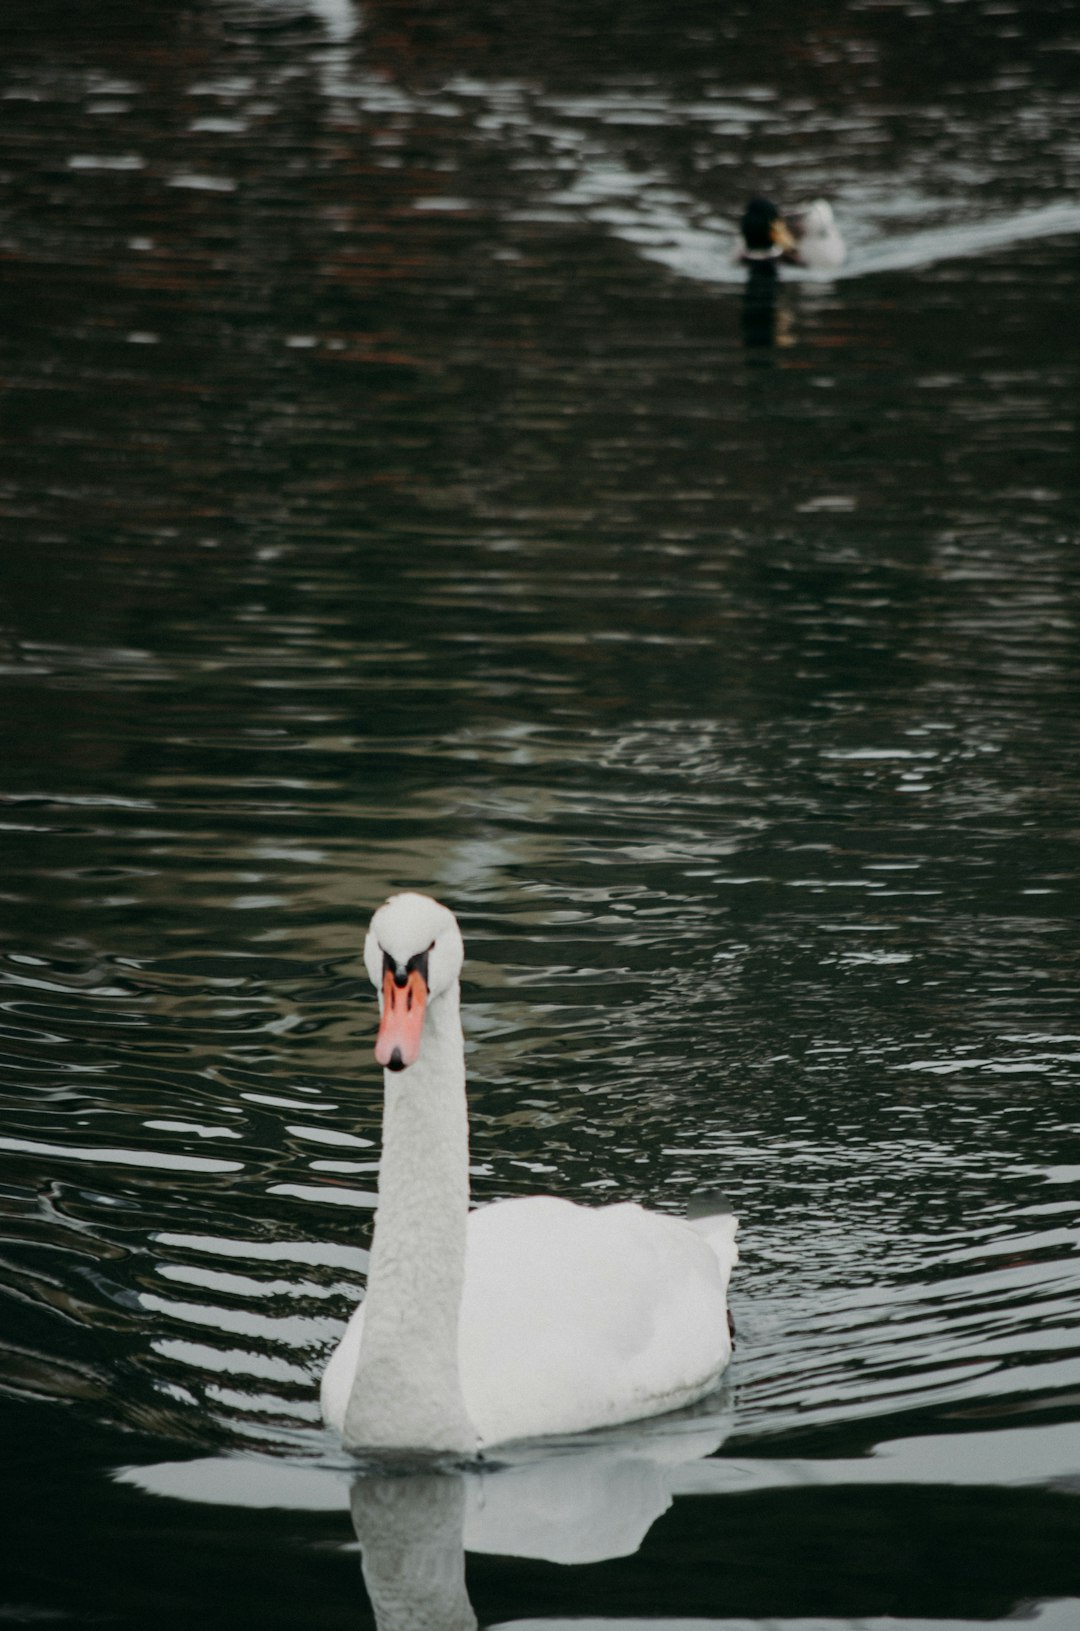 mute swan on the calm body of water